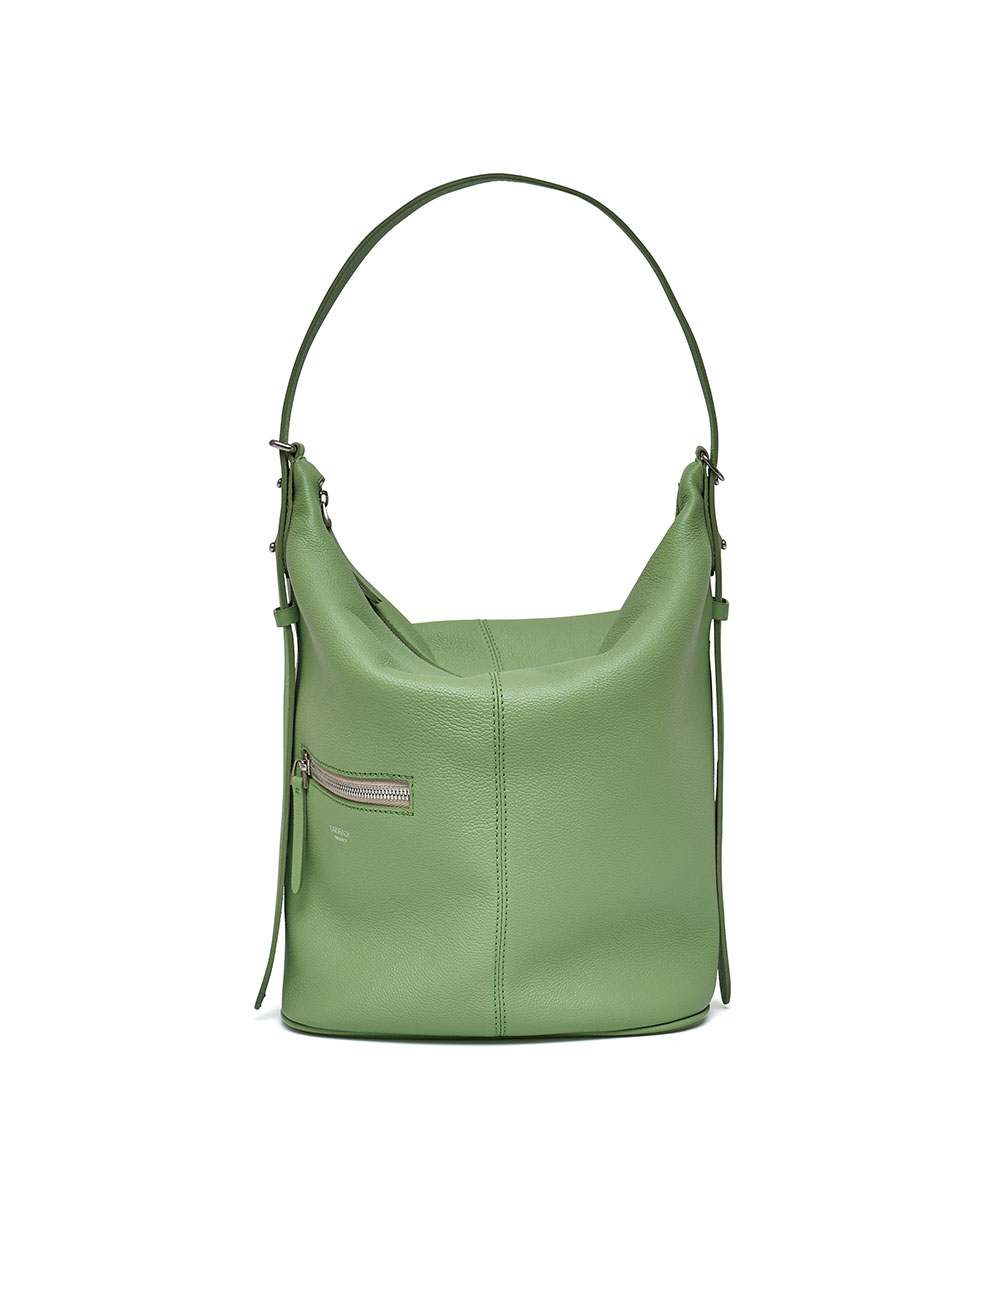 HAVE bag / apple green (sold out)